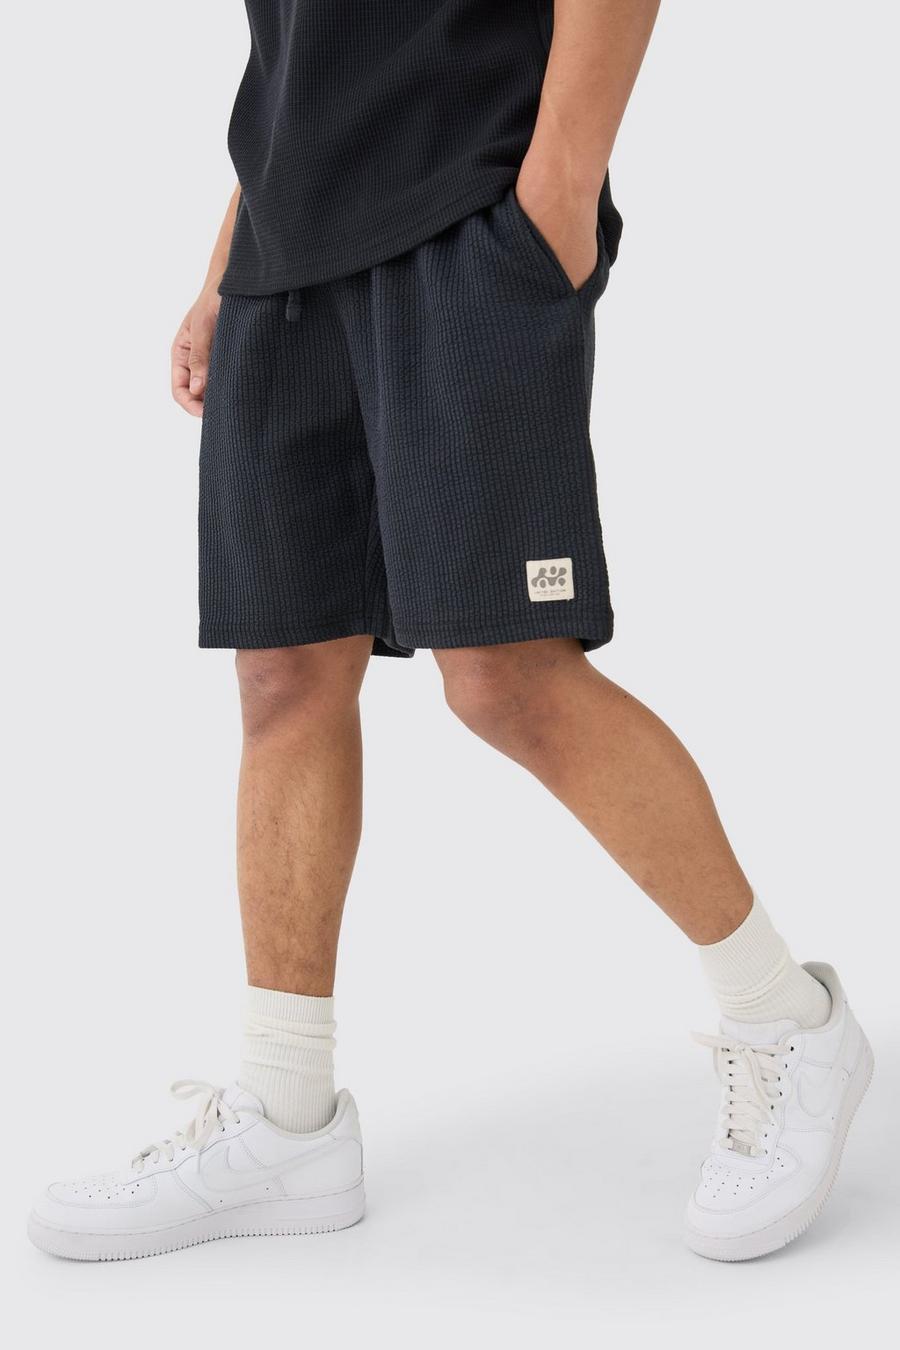 Black Relaxed Mid Length Textured Short With Woven Tab